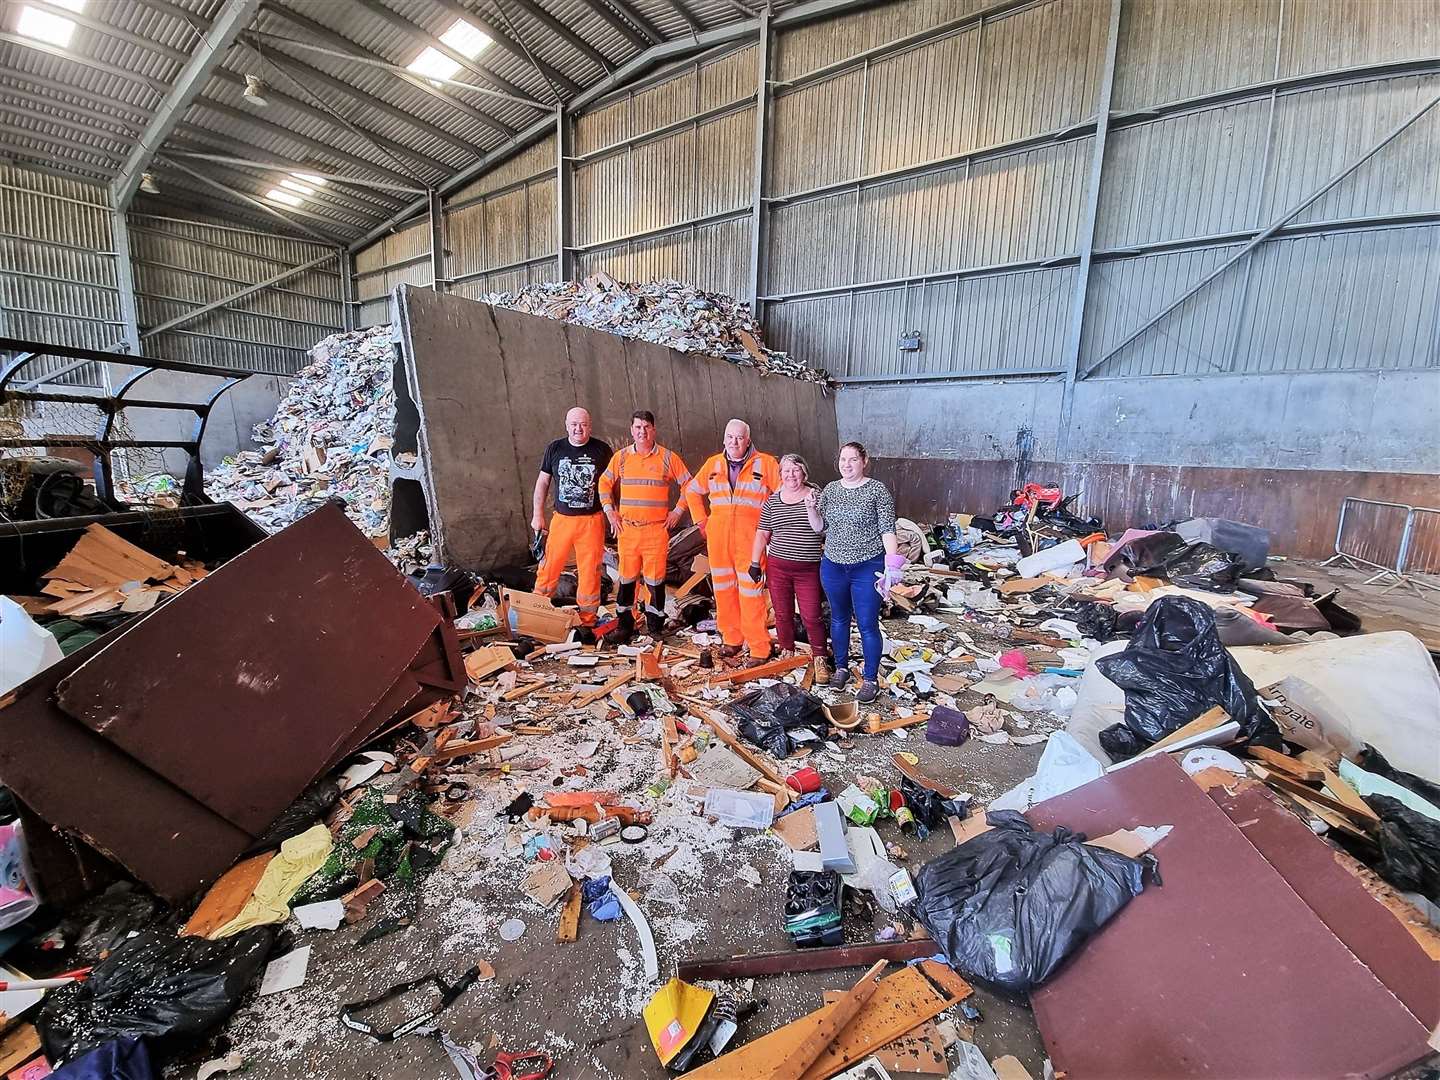 Looking at the tons of compacted waste at the site, Brian said it was like looking for a needle in a haystack to find the lost pendant with his mum's ashes.